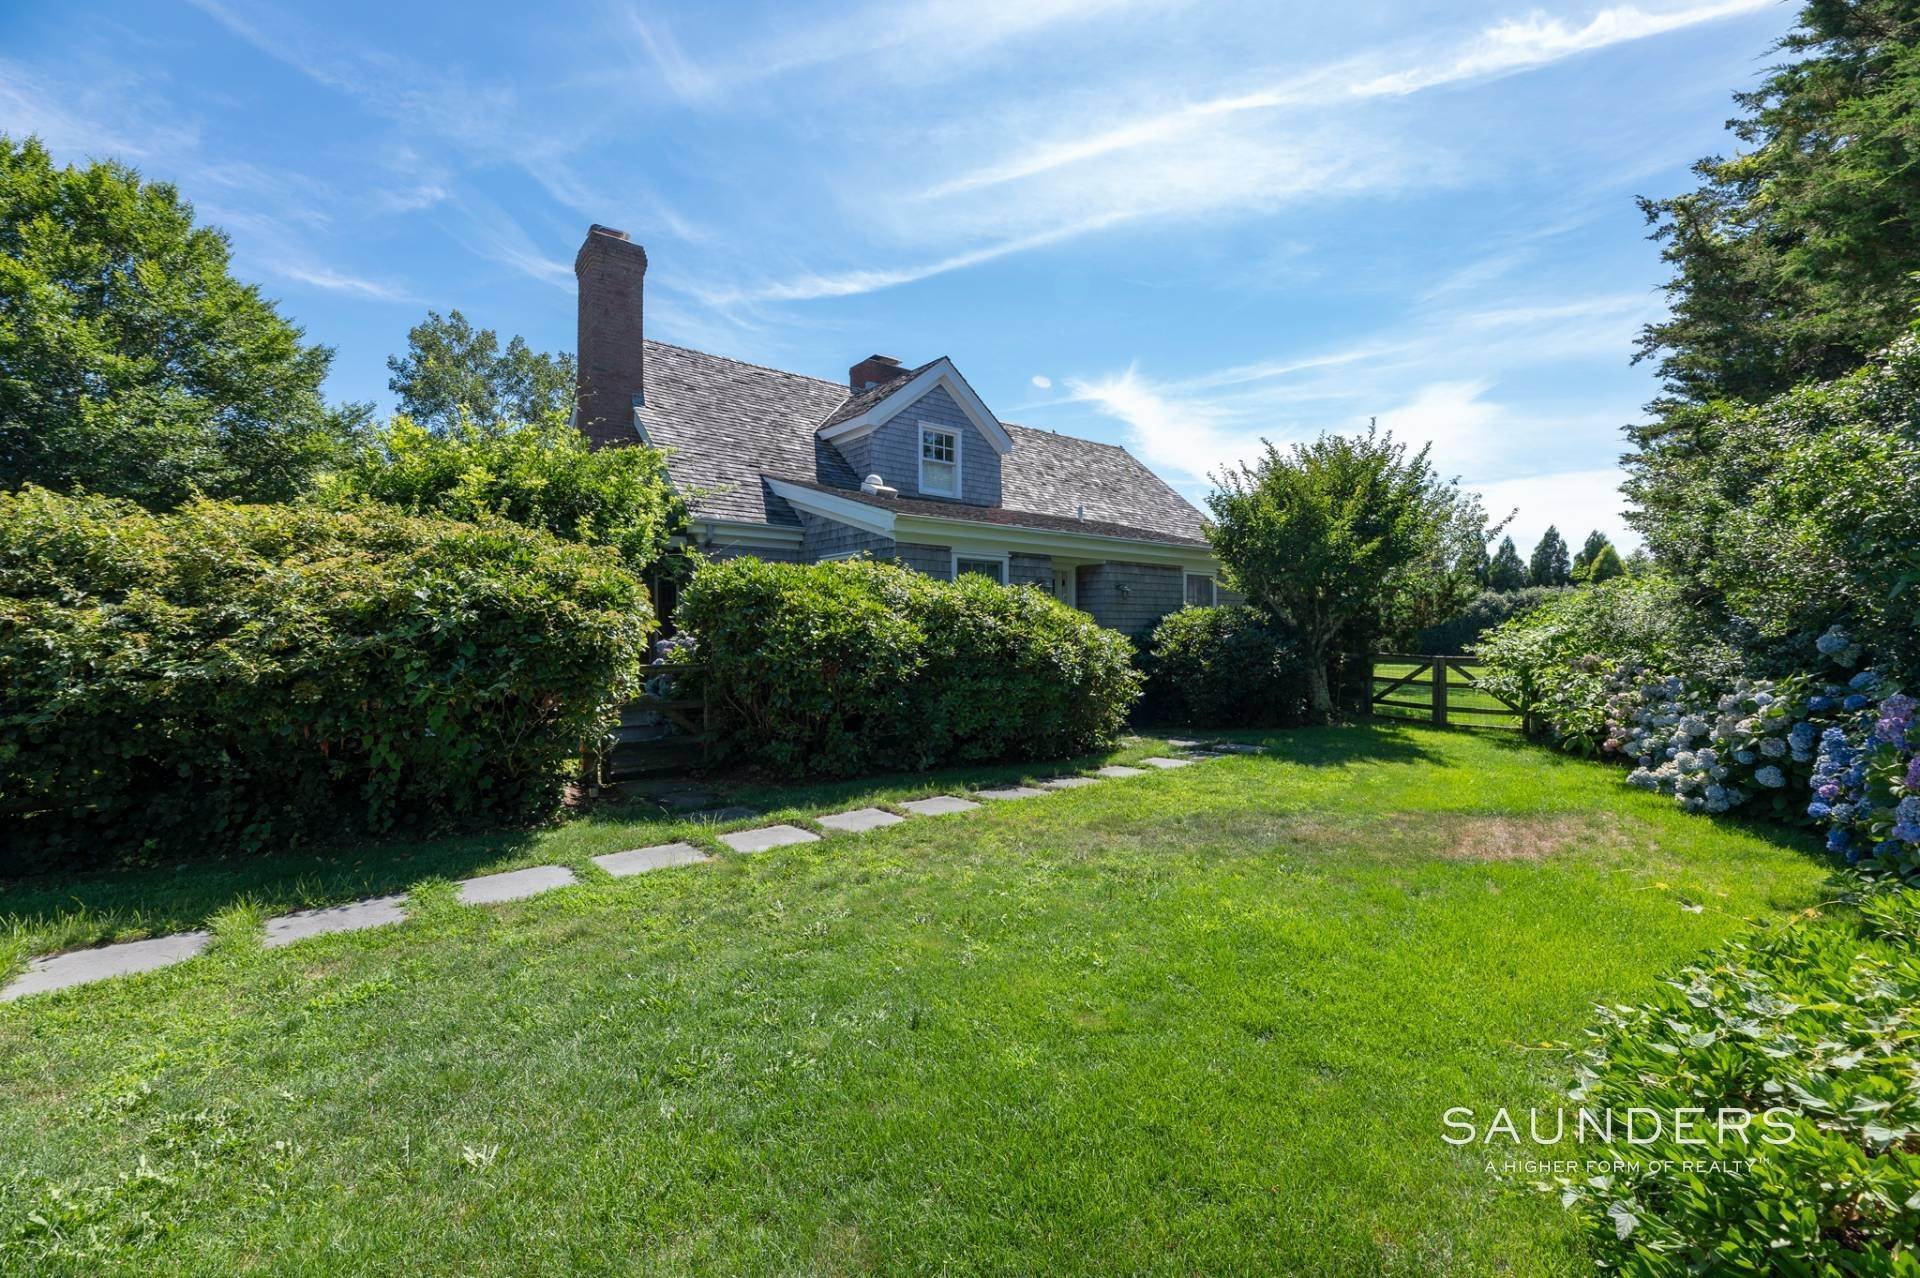 2. Single Family Homes for Sale at Sagaponack South Cottage On 1.56 Acres 51 Farmview Drive, Sagaponack, NY 11962